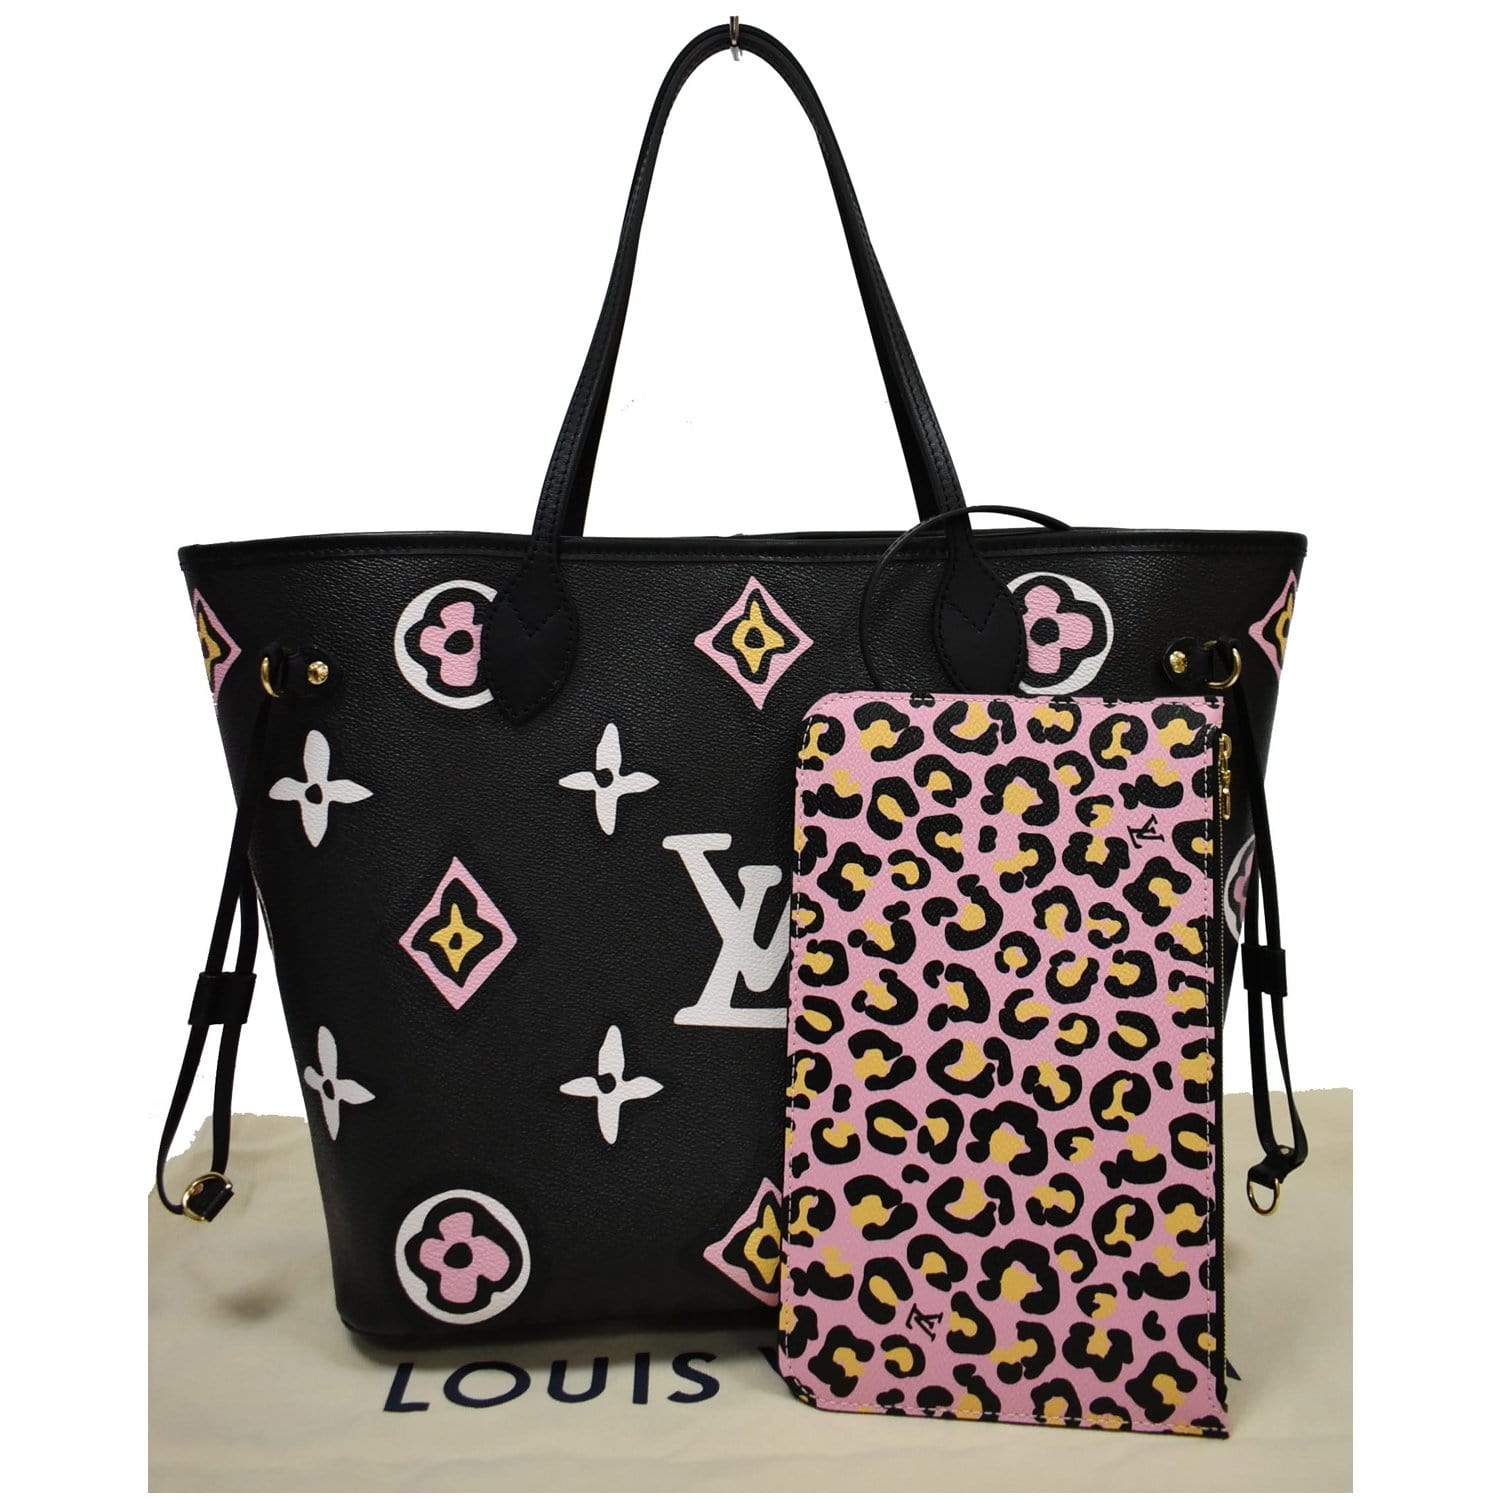 Louis Vuitton bags that are must-haves from the Neverfull to Speedy